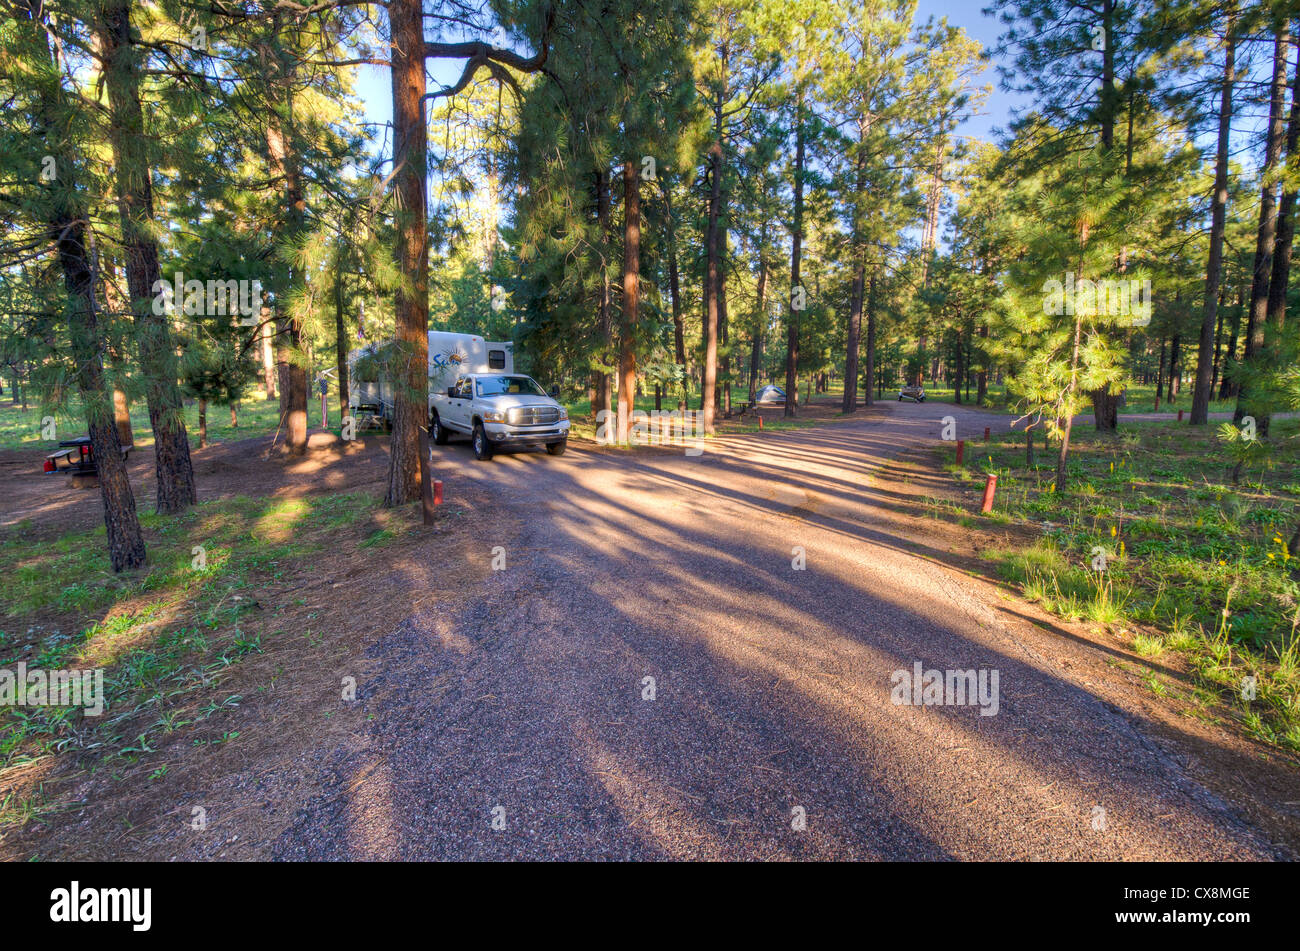 Canyon Point has a range of individual and group campsites to suit many visitors. The campground sits in a heavily wooded pines. Stock Photo